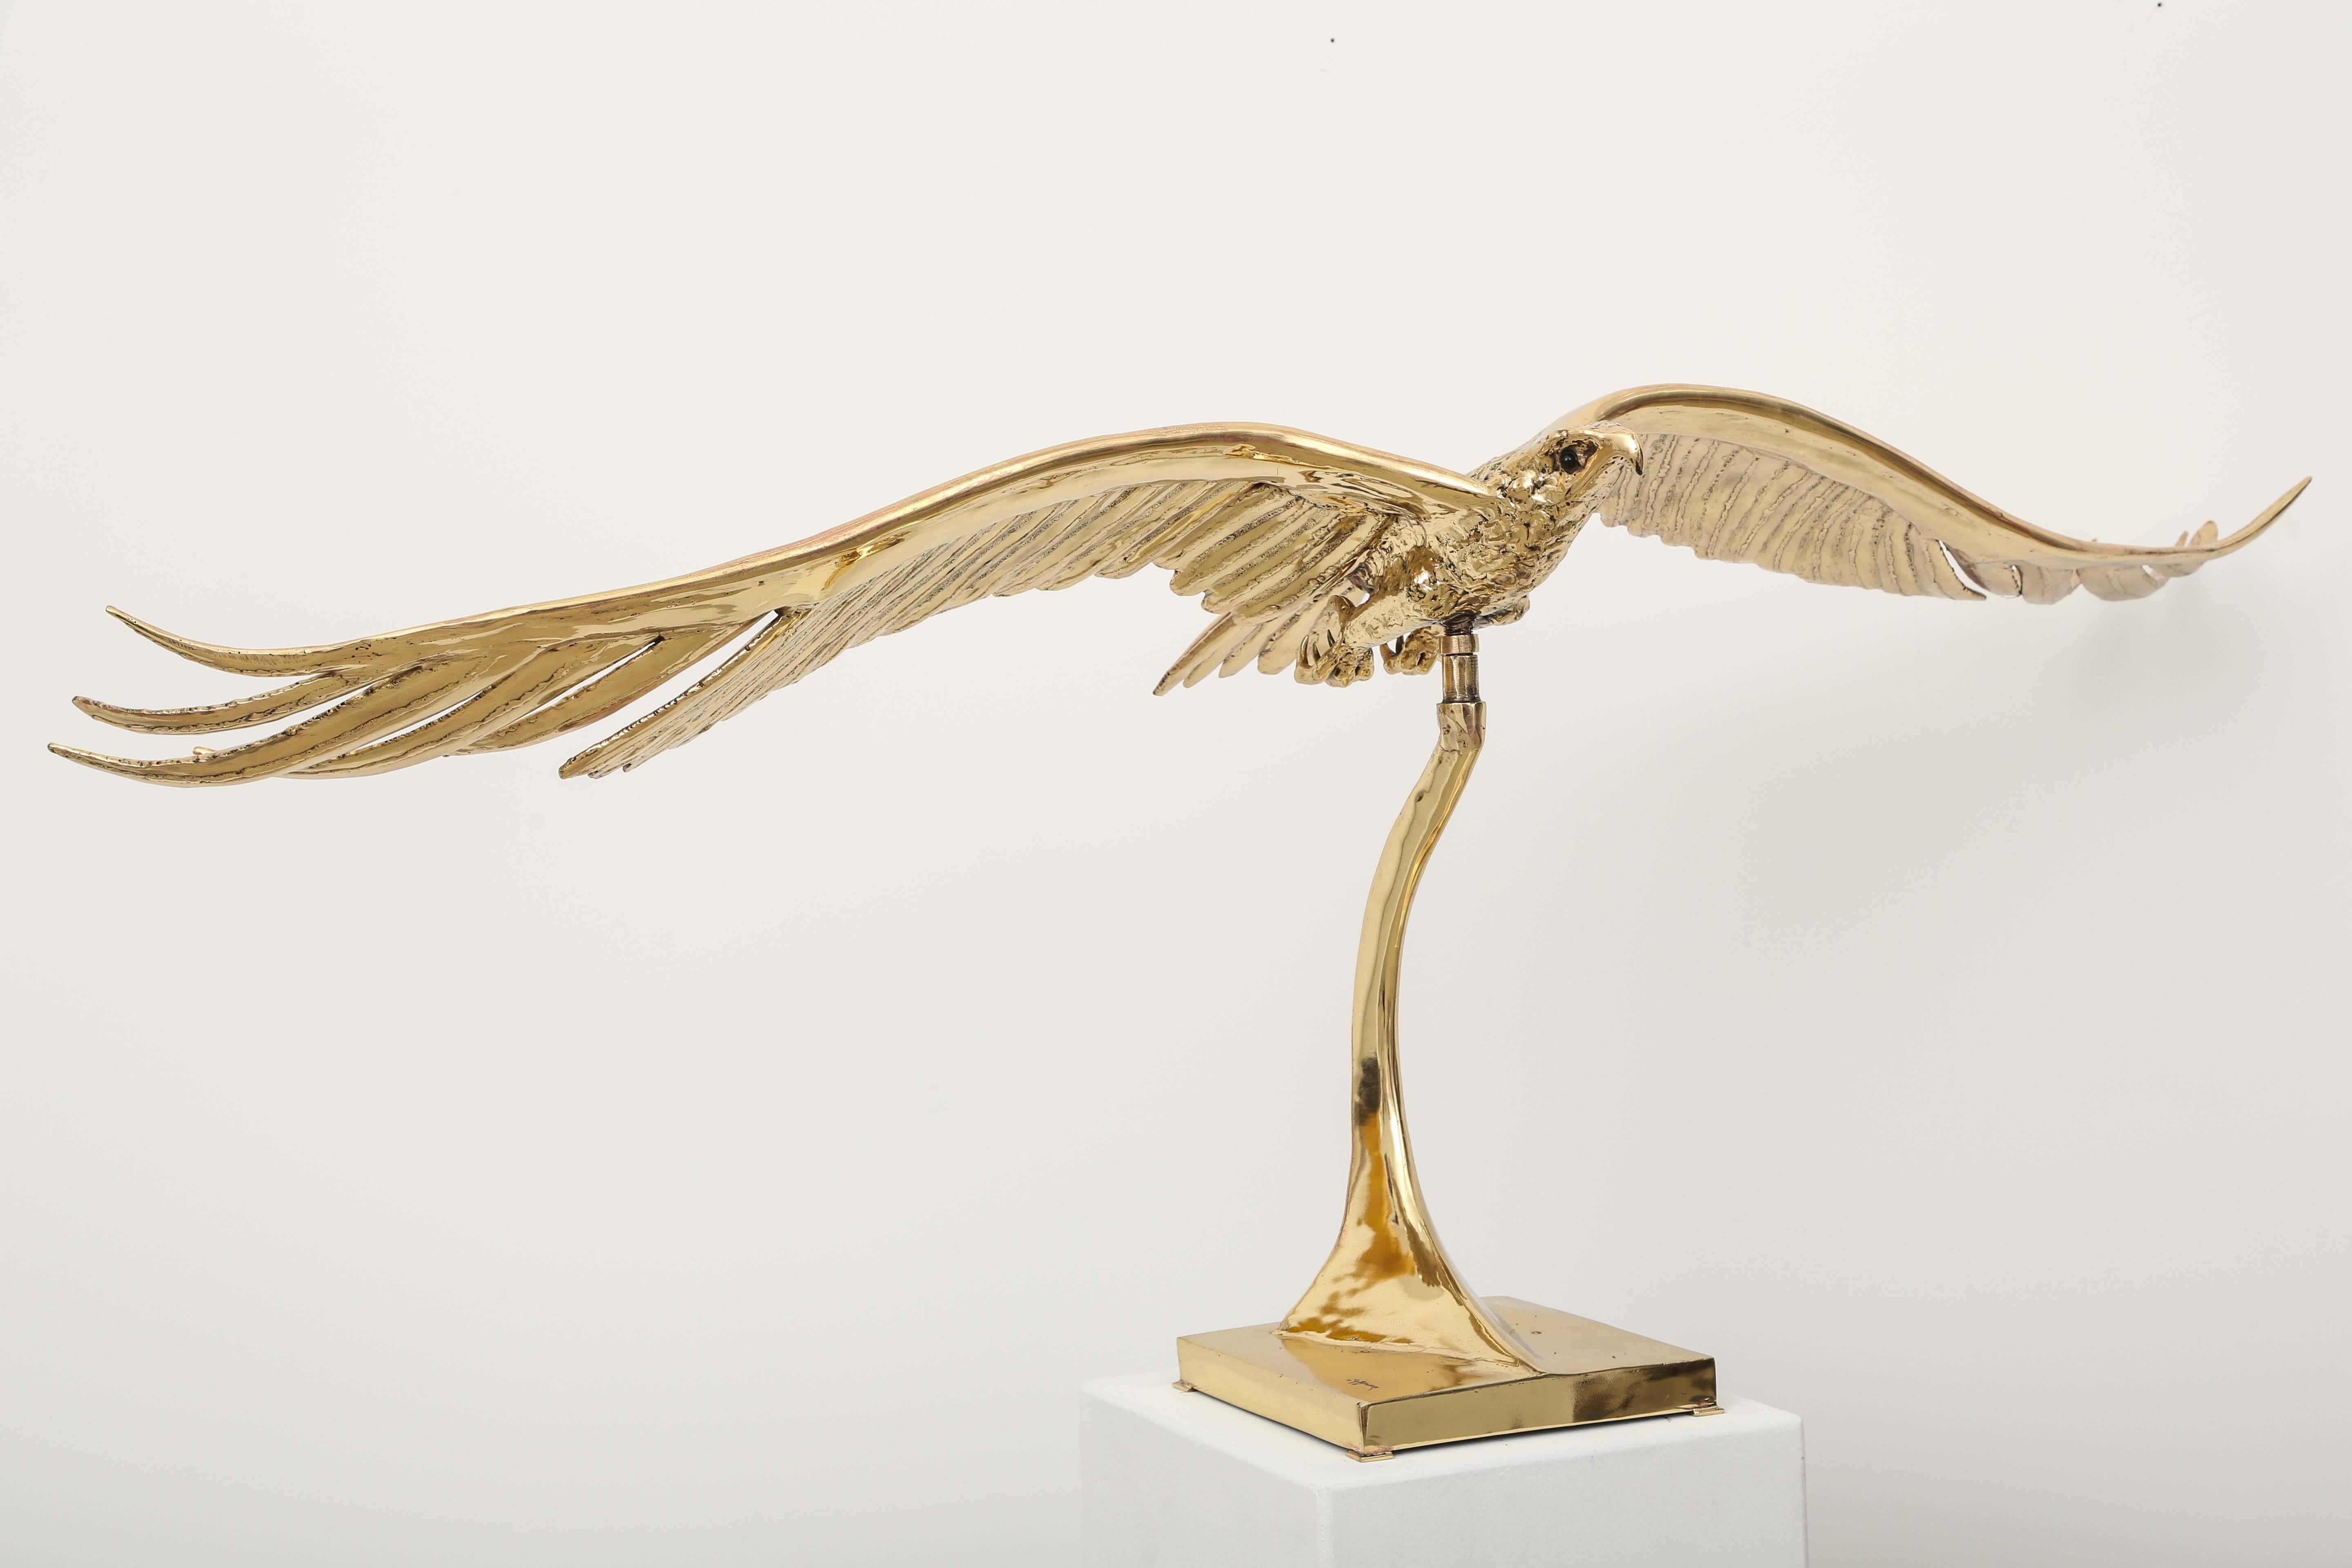 Superb movement for this bronze sculpture by J Duval Brasseur. The elegant curved lines and the shape of the base give a strong feeling of this flying eagle.
Very unique piece by this well knowned artist from the south of France, his work shop was